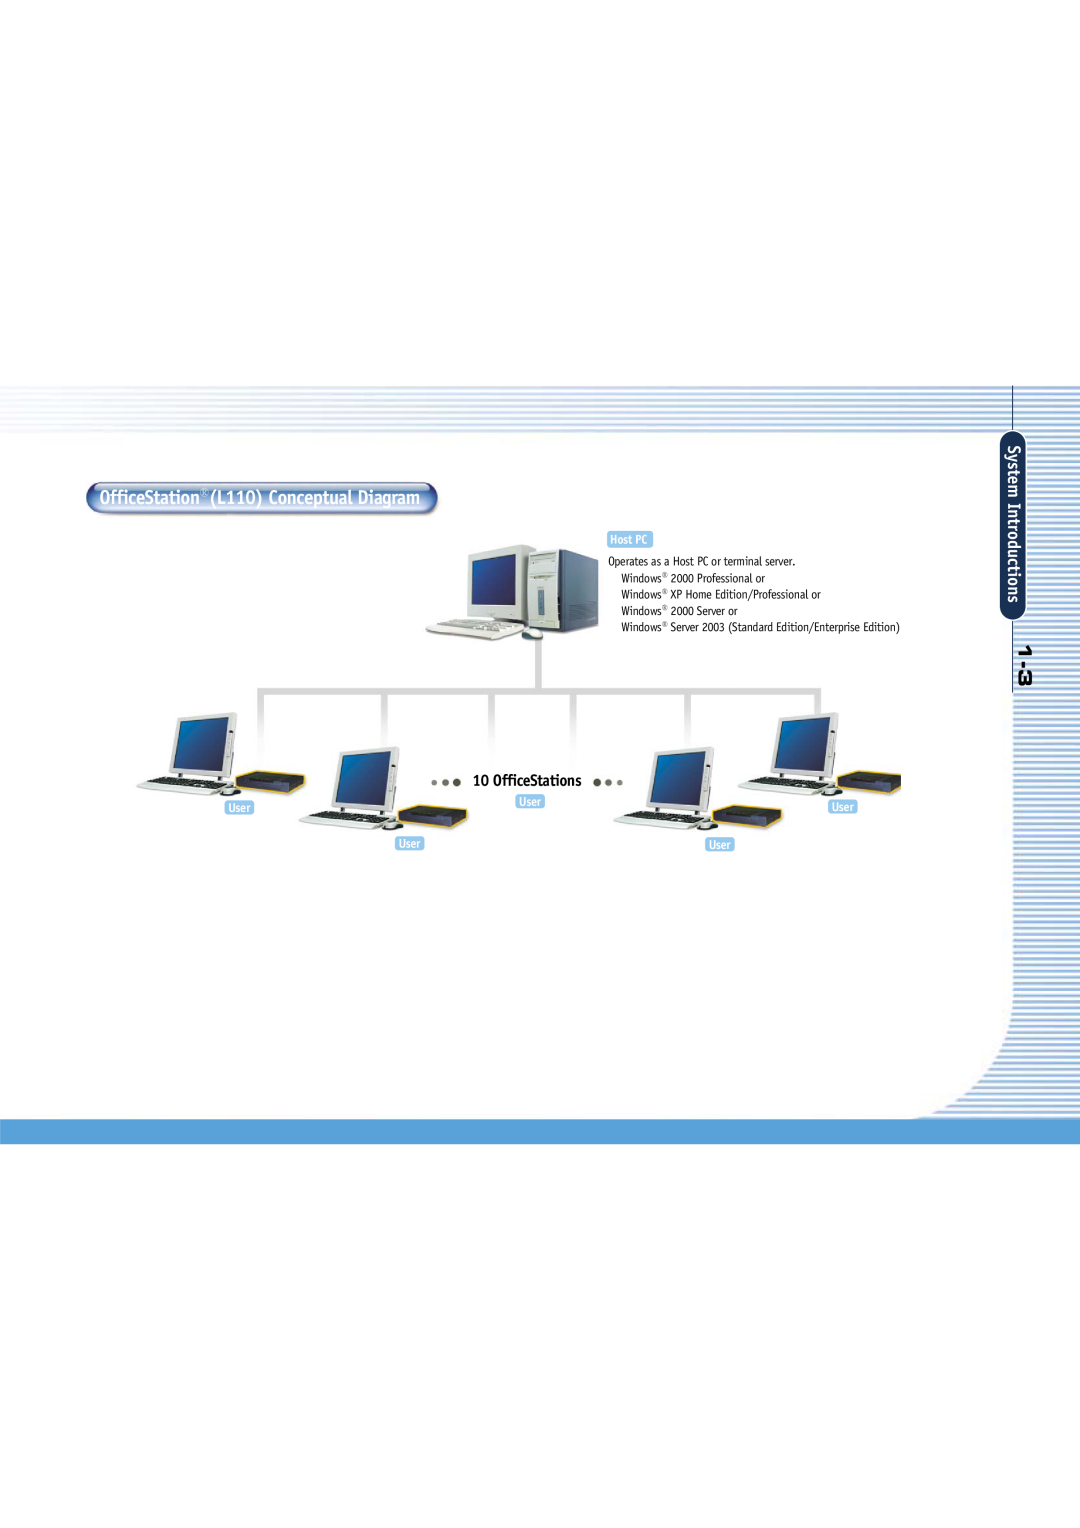 Gateway manual OfficeStation L110 Conceptual Diagram, System Introductions, OfficeStations, Host PC, User 